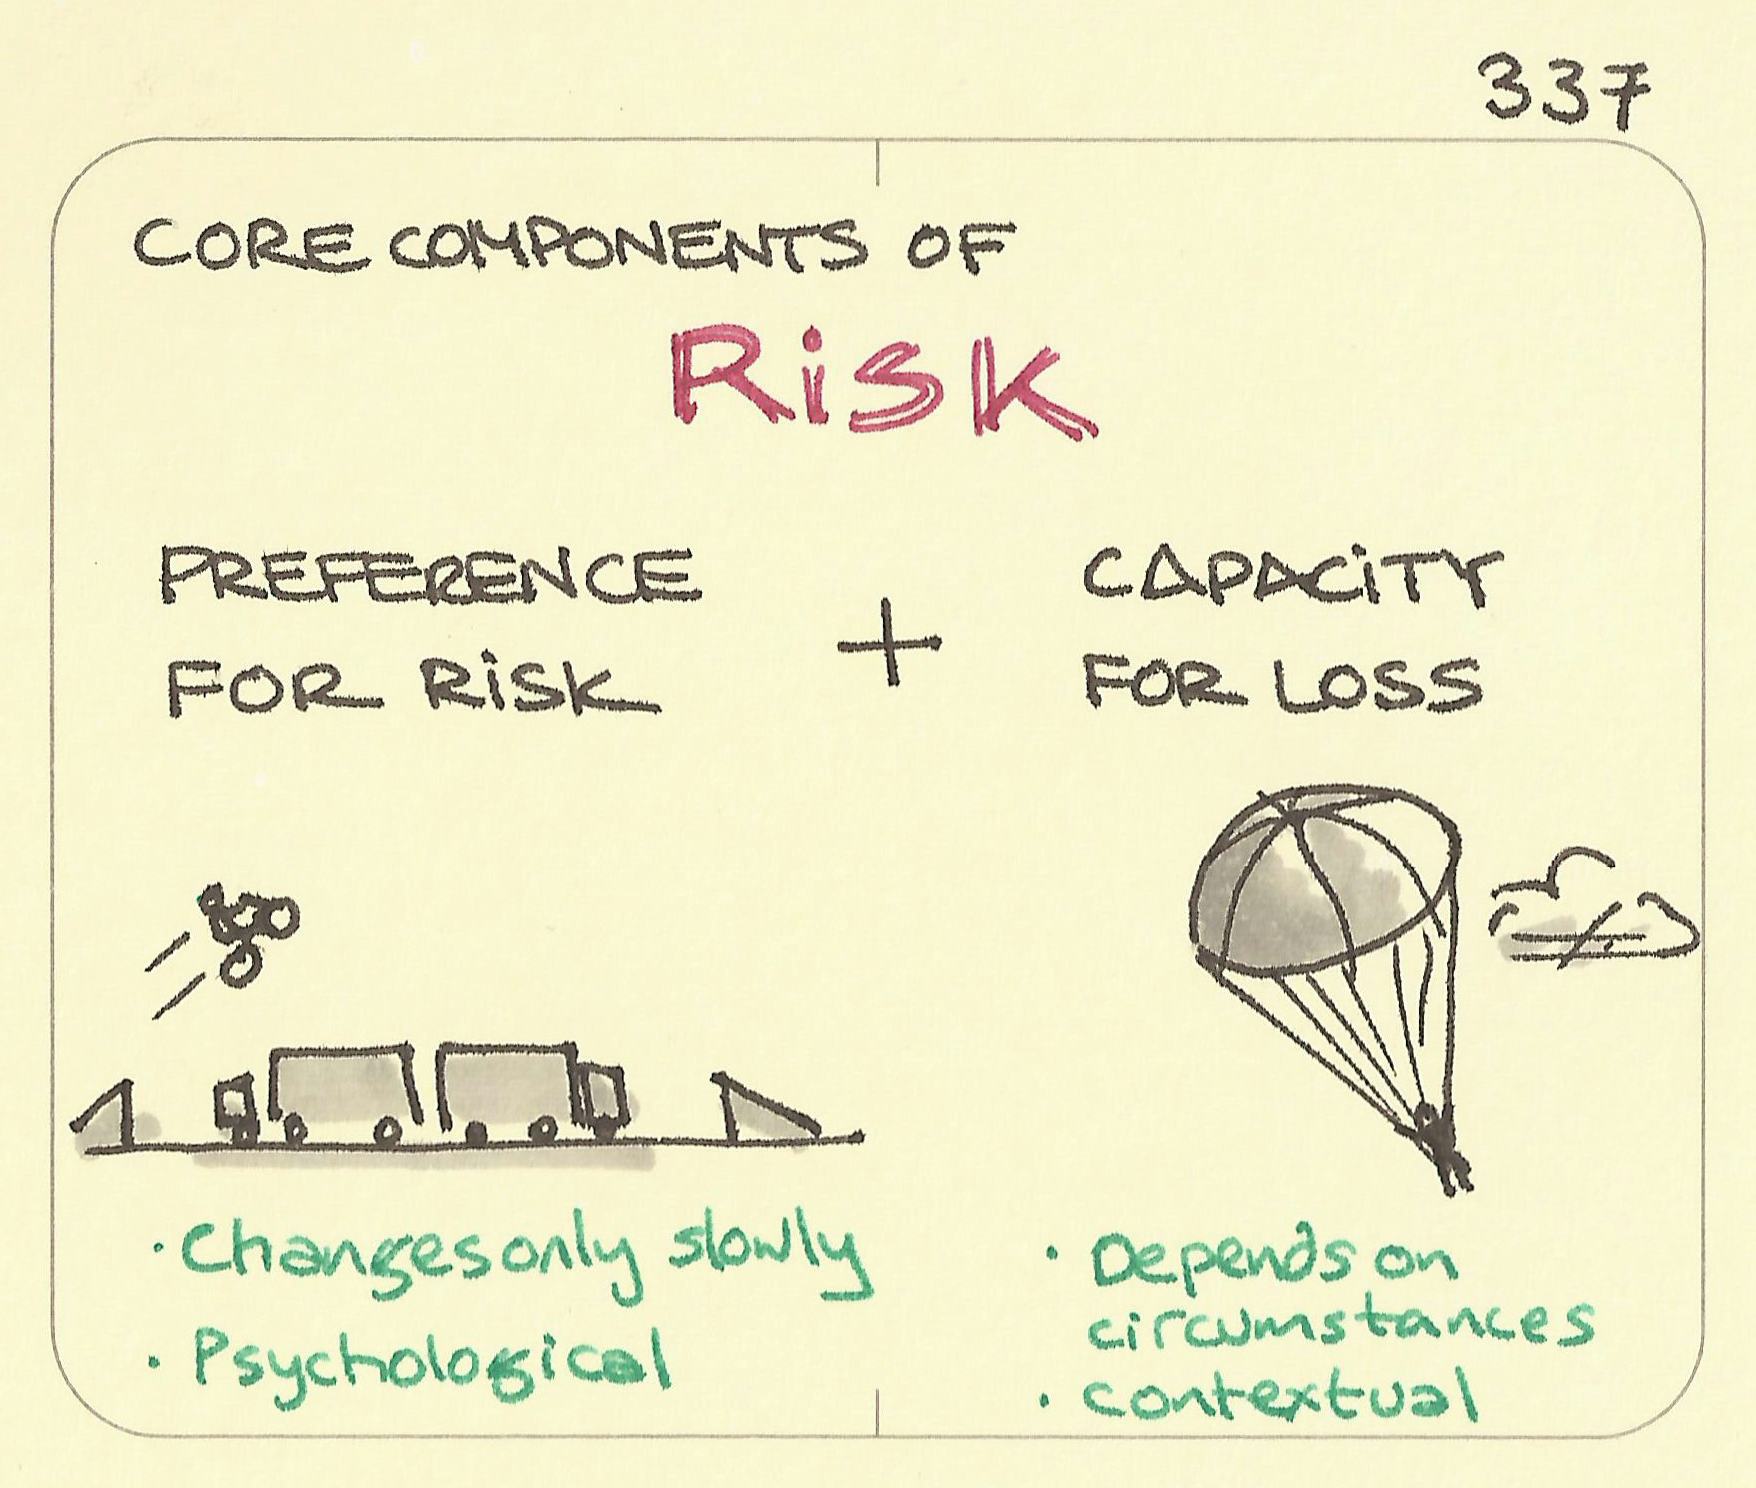 Core components of risk - Sketchplanations